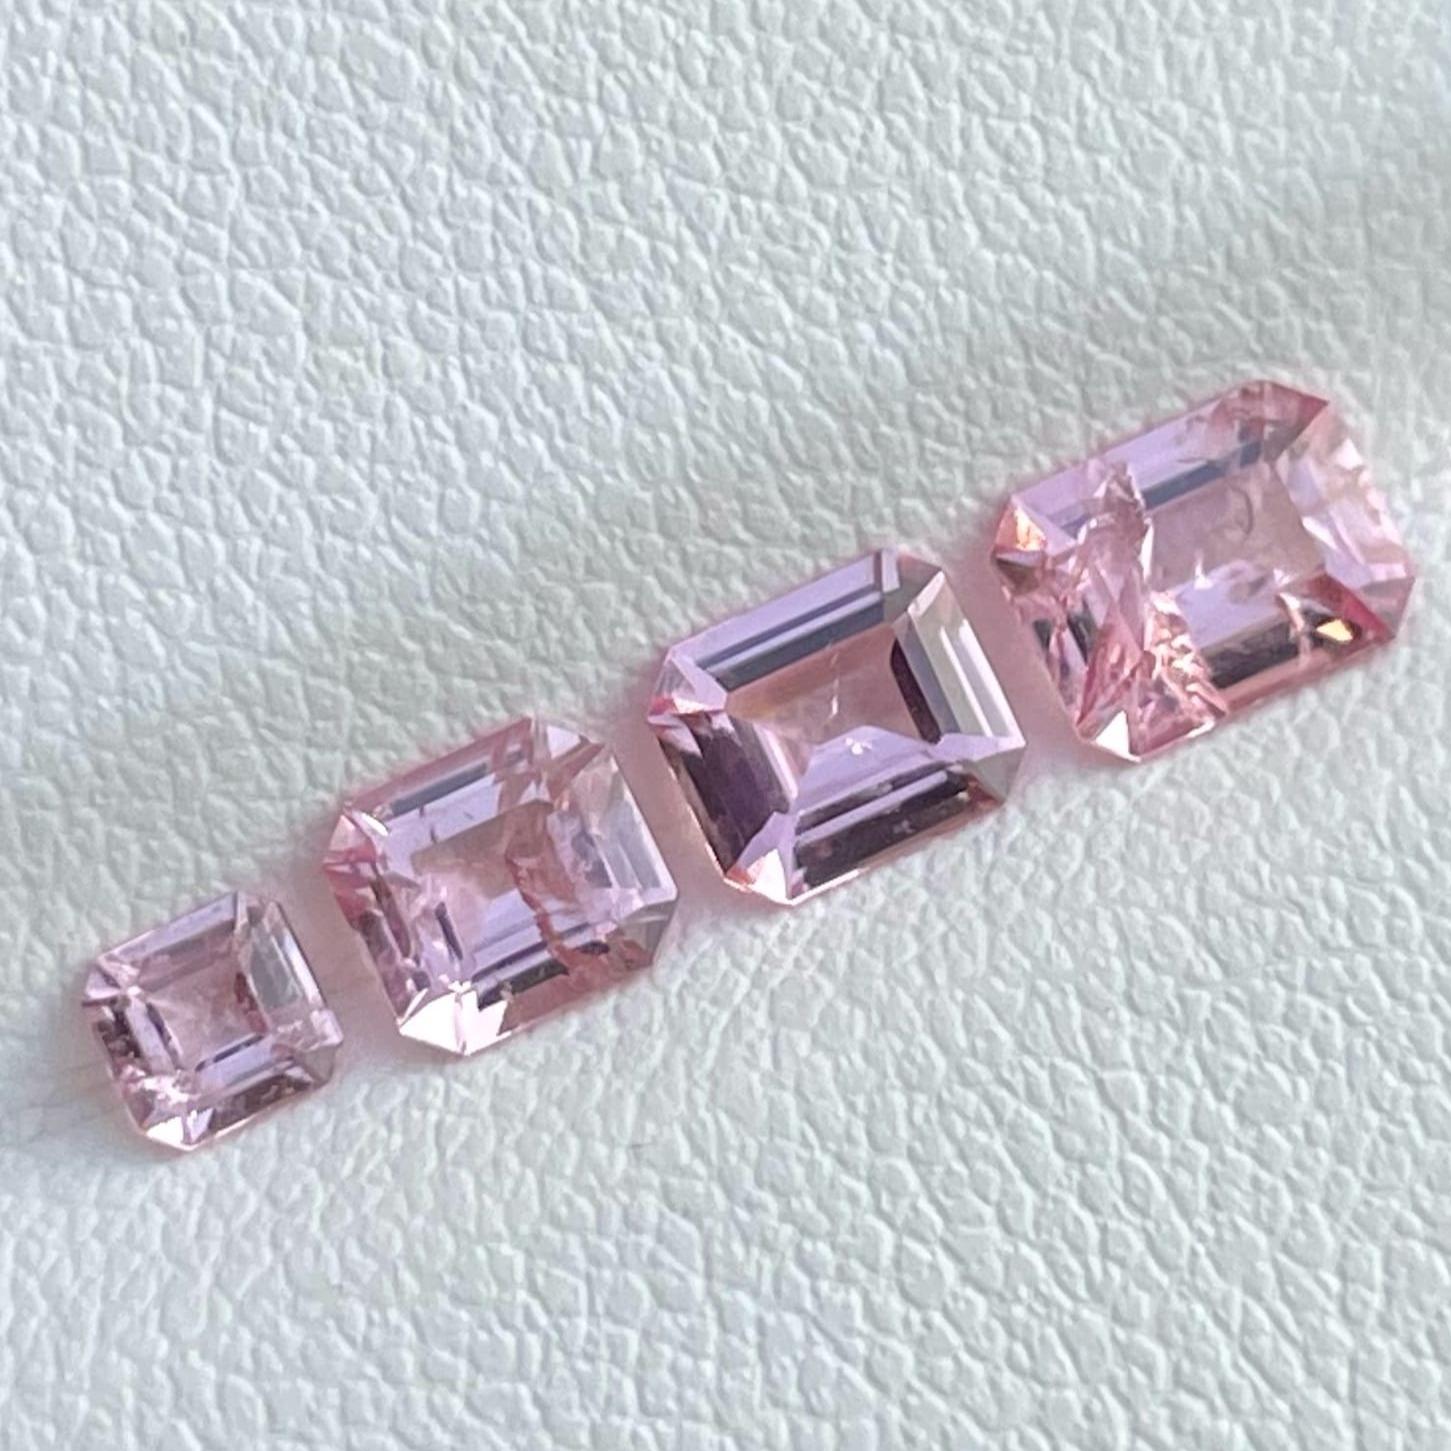 Gemstone Type Natural Pink Spinel Gemstone Jewelry
Weight 1.94 carats
Weight Each 0.18, 0.52, 0.52 and 0.70 carats
Clarity SI to VVS
Origin Tajikistan
Treatment None




Indulge in the allure of the Pink Spinel Jewelry Batch, a collection of natural